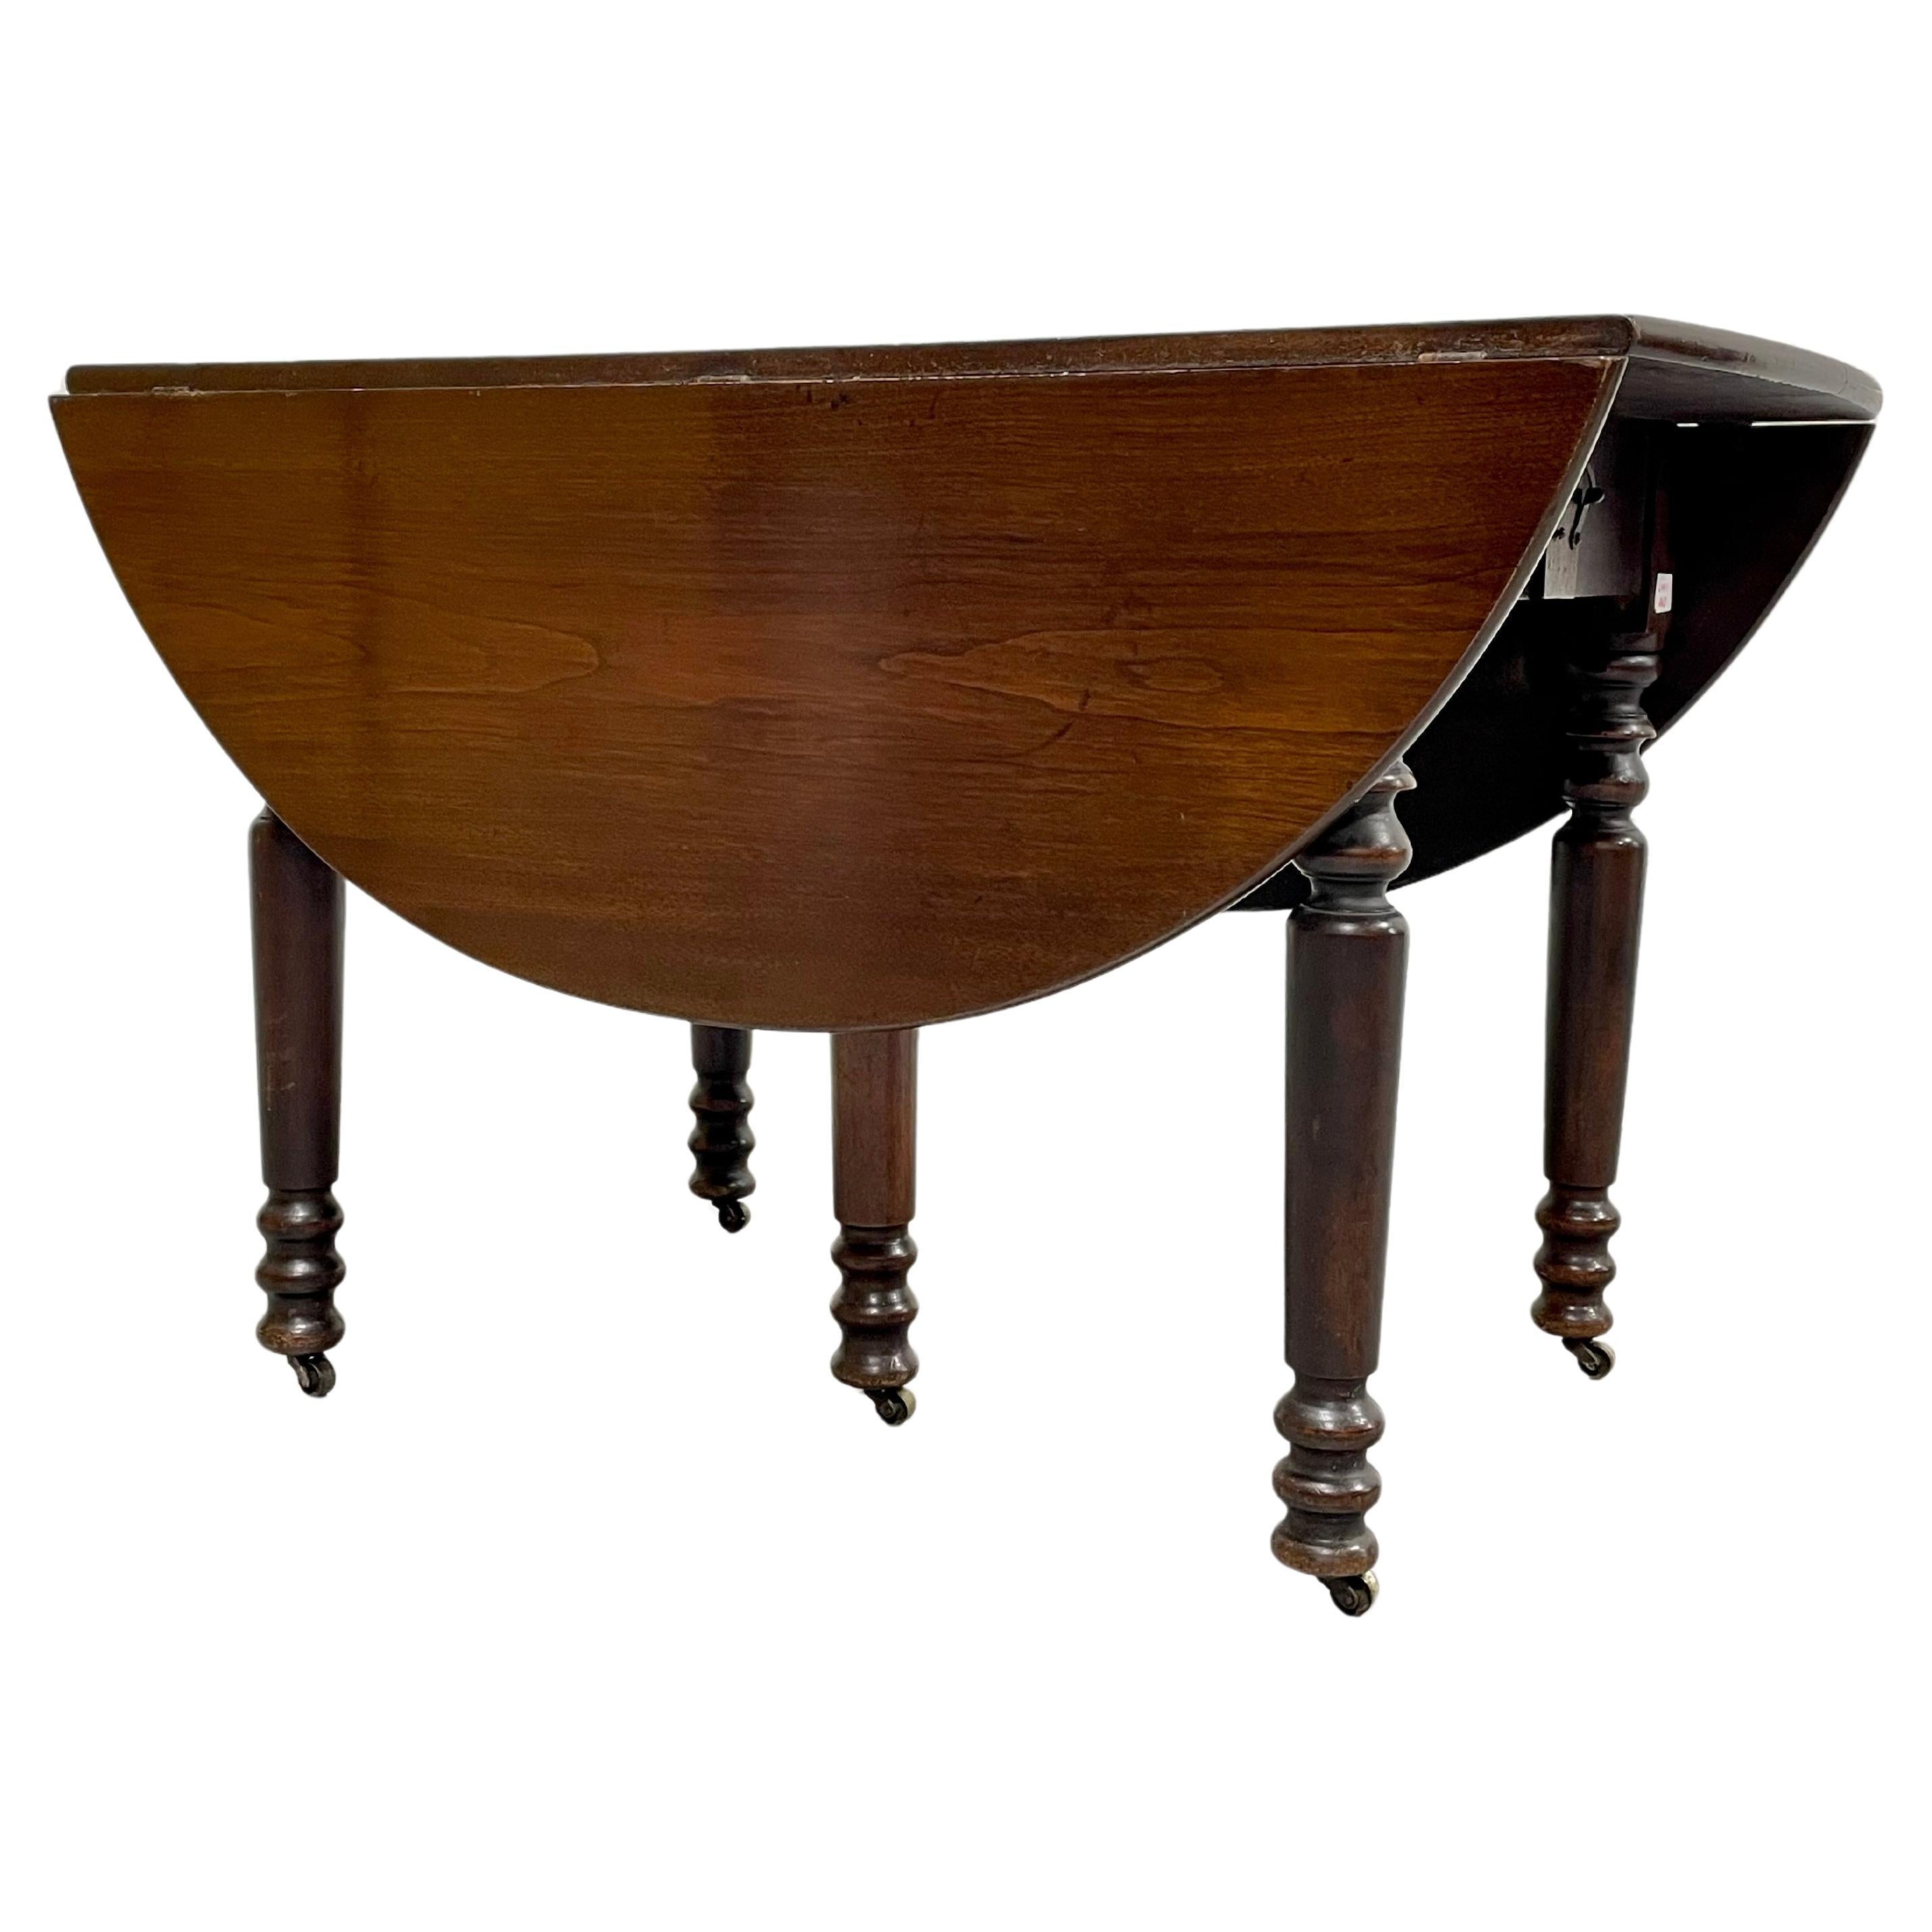 Antique Drop Leaf Expandable Mahogany Oval Dining Table, c. 1910 For Sale